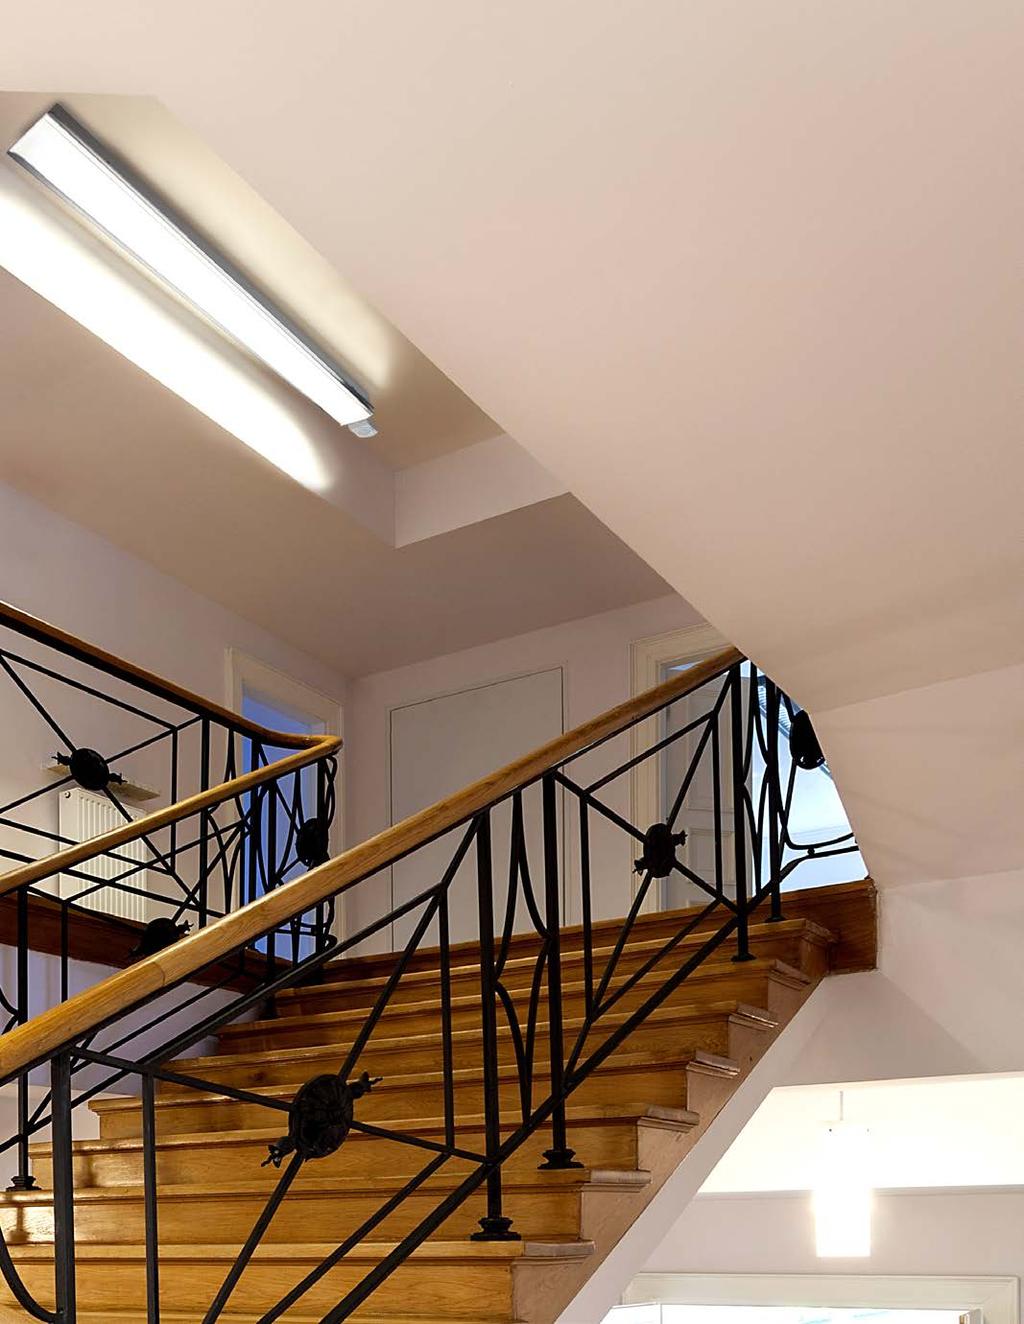 Compliance Assured Meeting governmental regulations is a core concern when lighting stairwells that demand specific requirements.